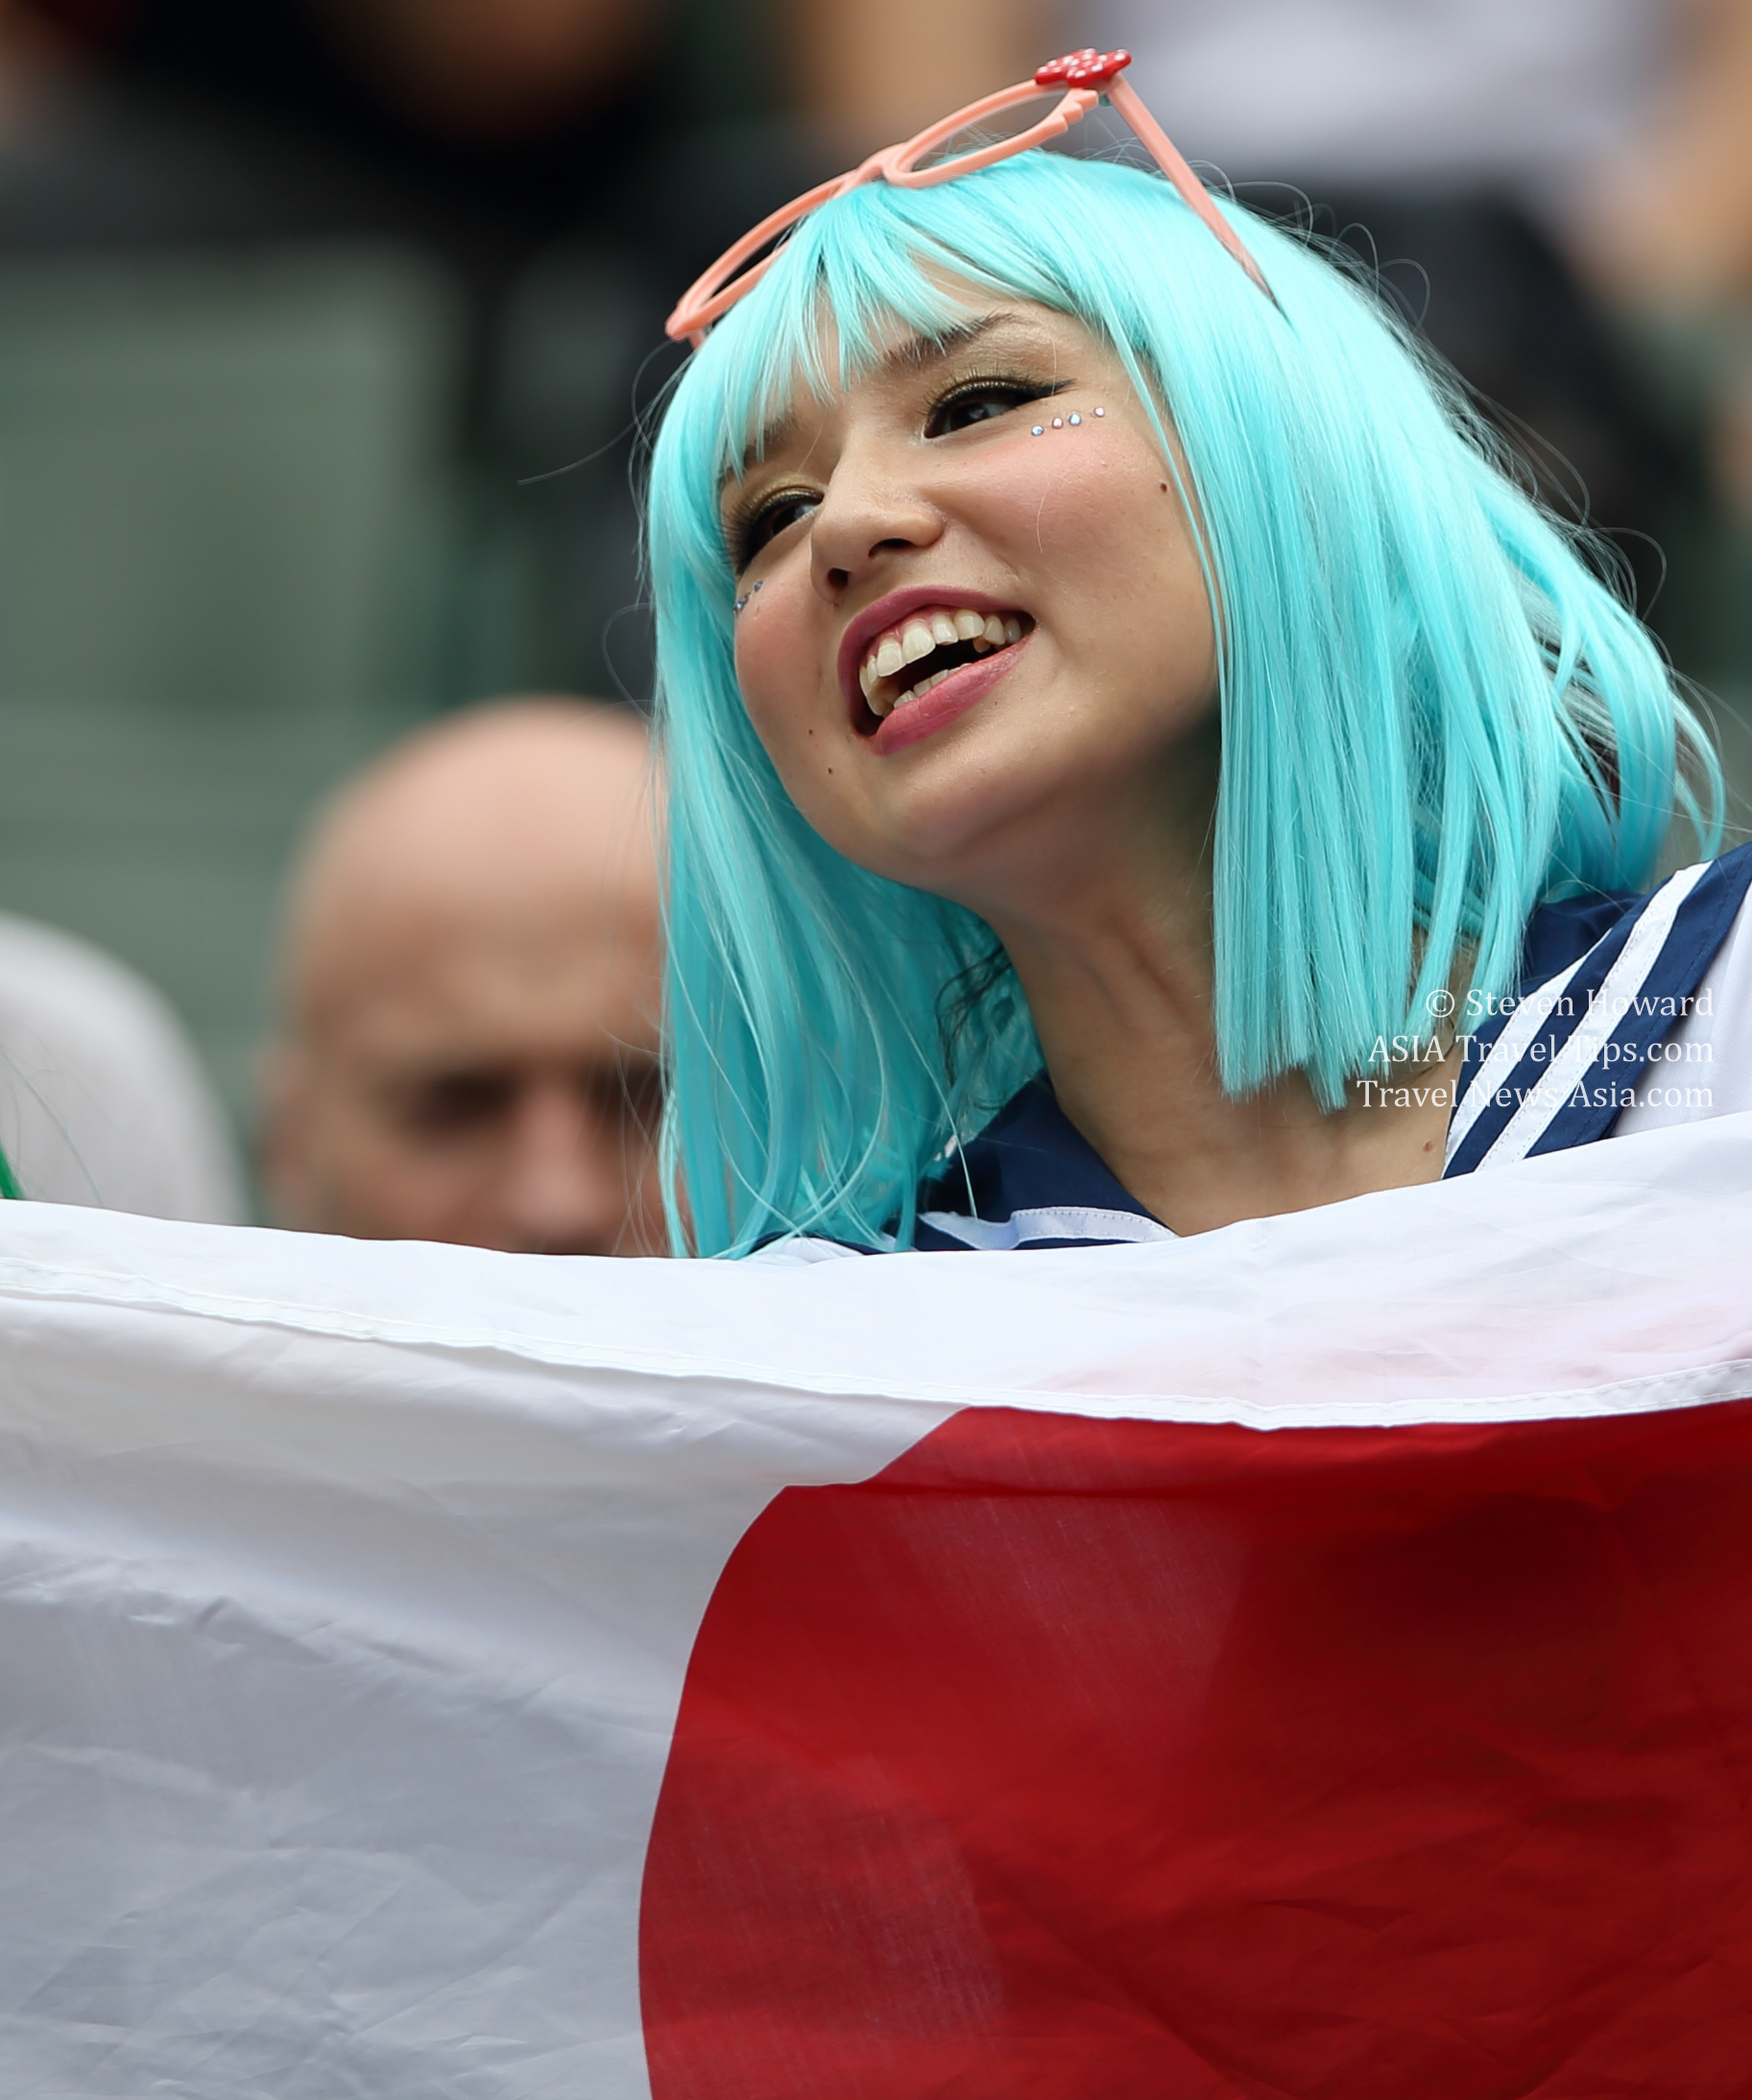 World Rugby has appointed Nippon TV, NHK and J SPORTS as Rugby World Cup 2019 broadcast rights-holders for Japan. In total, 31 matches will be on-free-to-air broadcast, including the opening match between Japan and Russia on 20 September, the final on 2 November and all of Japan’s matches. Click to enlarge.